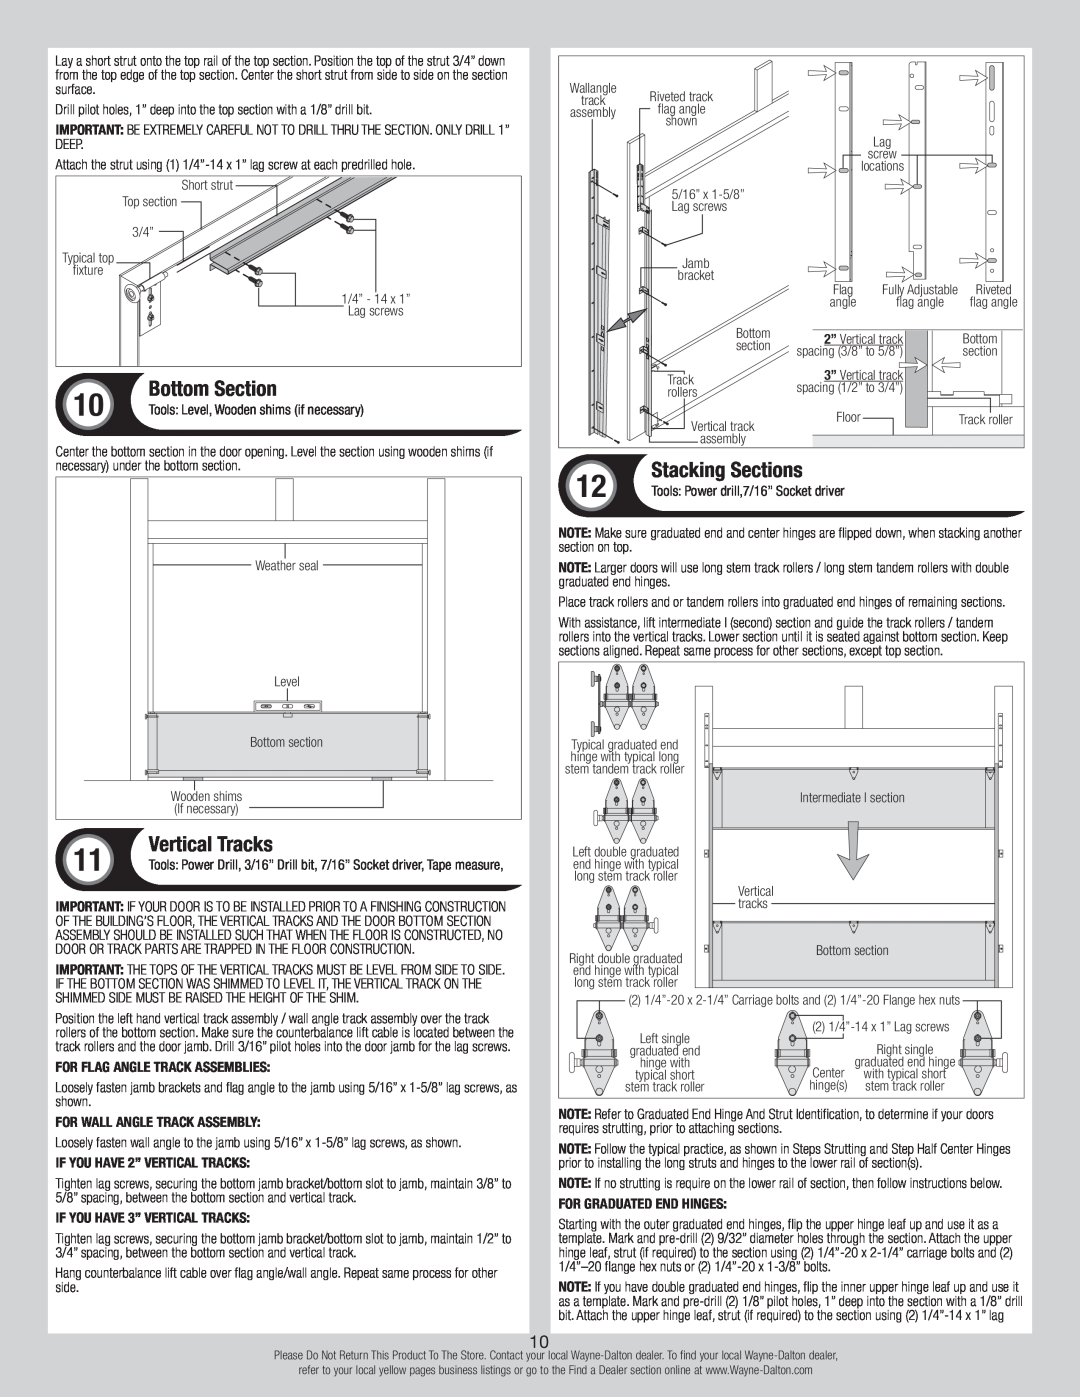 Wayne-Dalton 347610 installation instructions Bottom Section, Vertical Tracks, Stacking Sections 